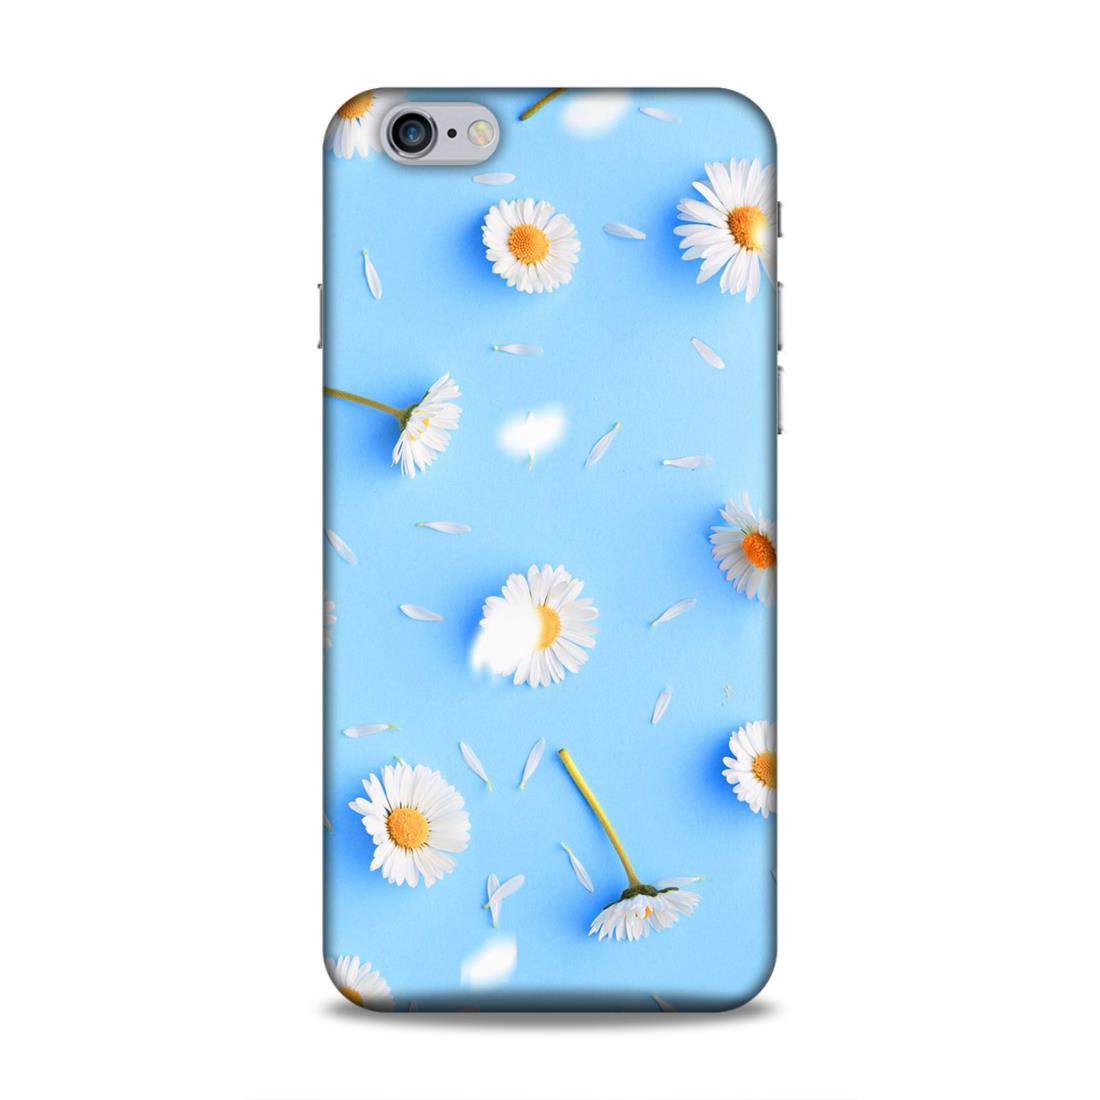 Floral In Sky Blue Hard Back Case For Apple iPhone 6 Plus / 6s Plus